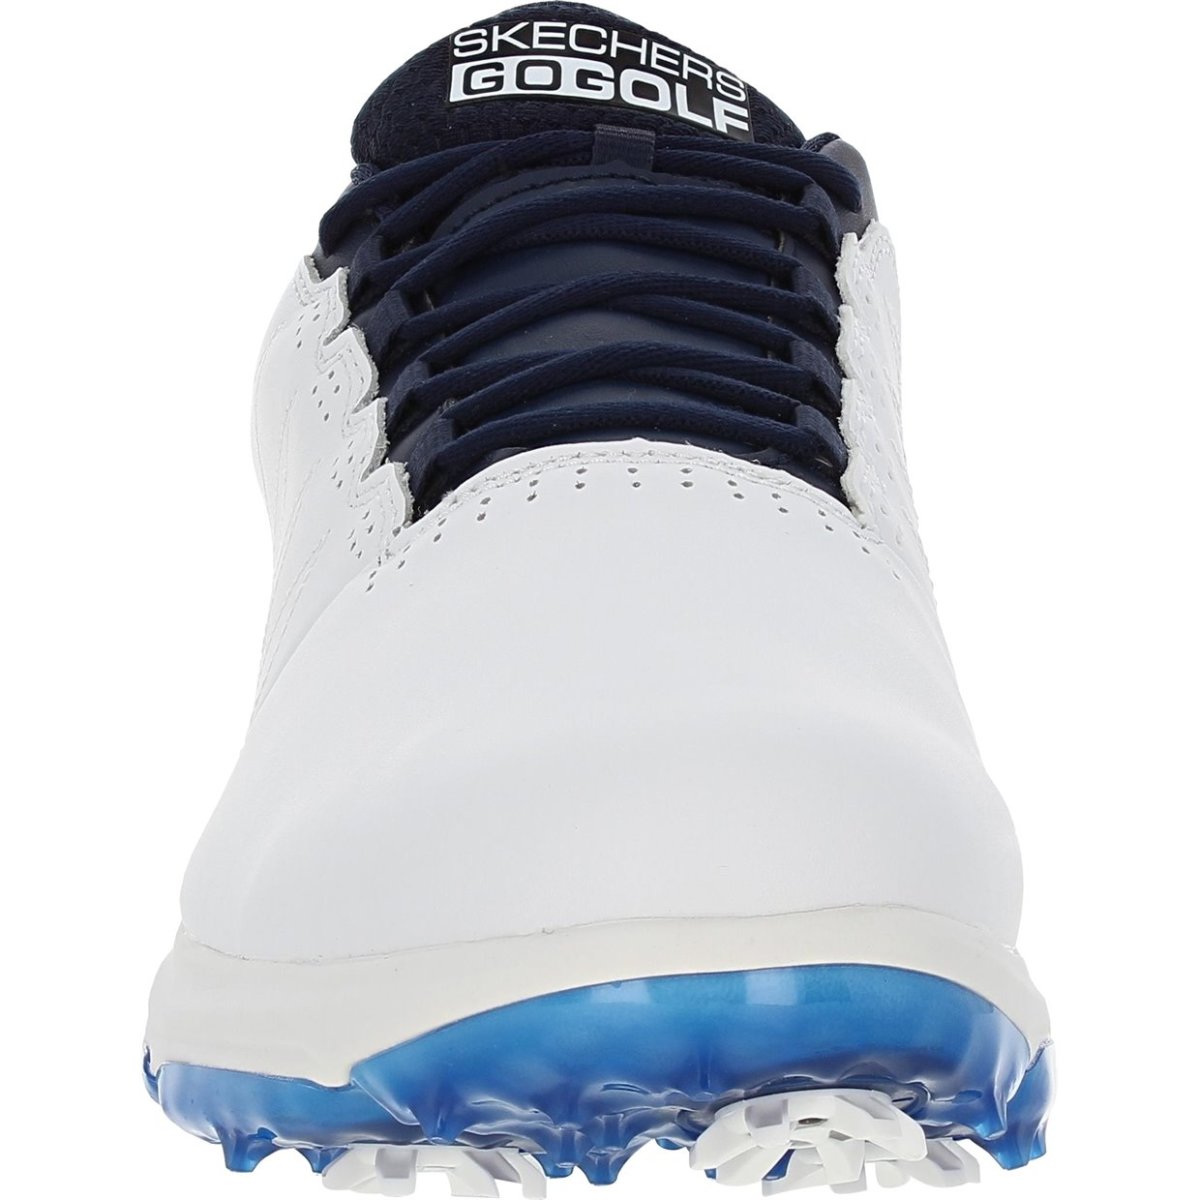 Shop the latest Skechers golf shoes, like the Skechers Go Golf Pro 4 Legacy, on Morning Read's online pro shop.